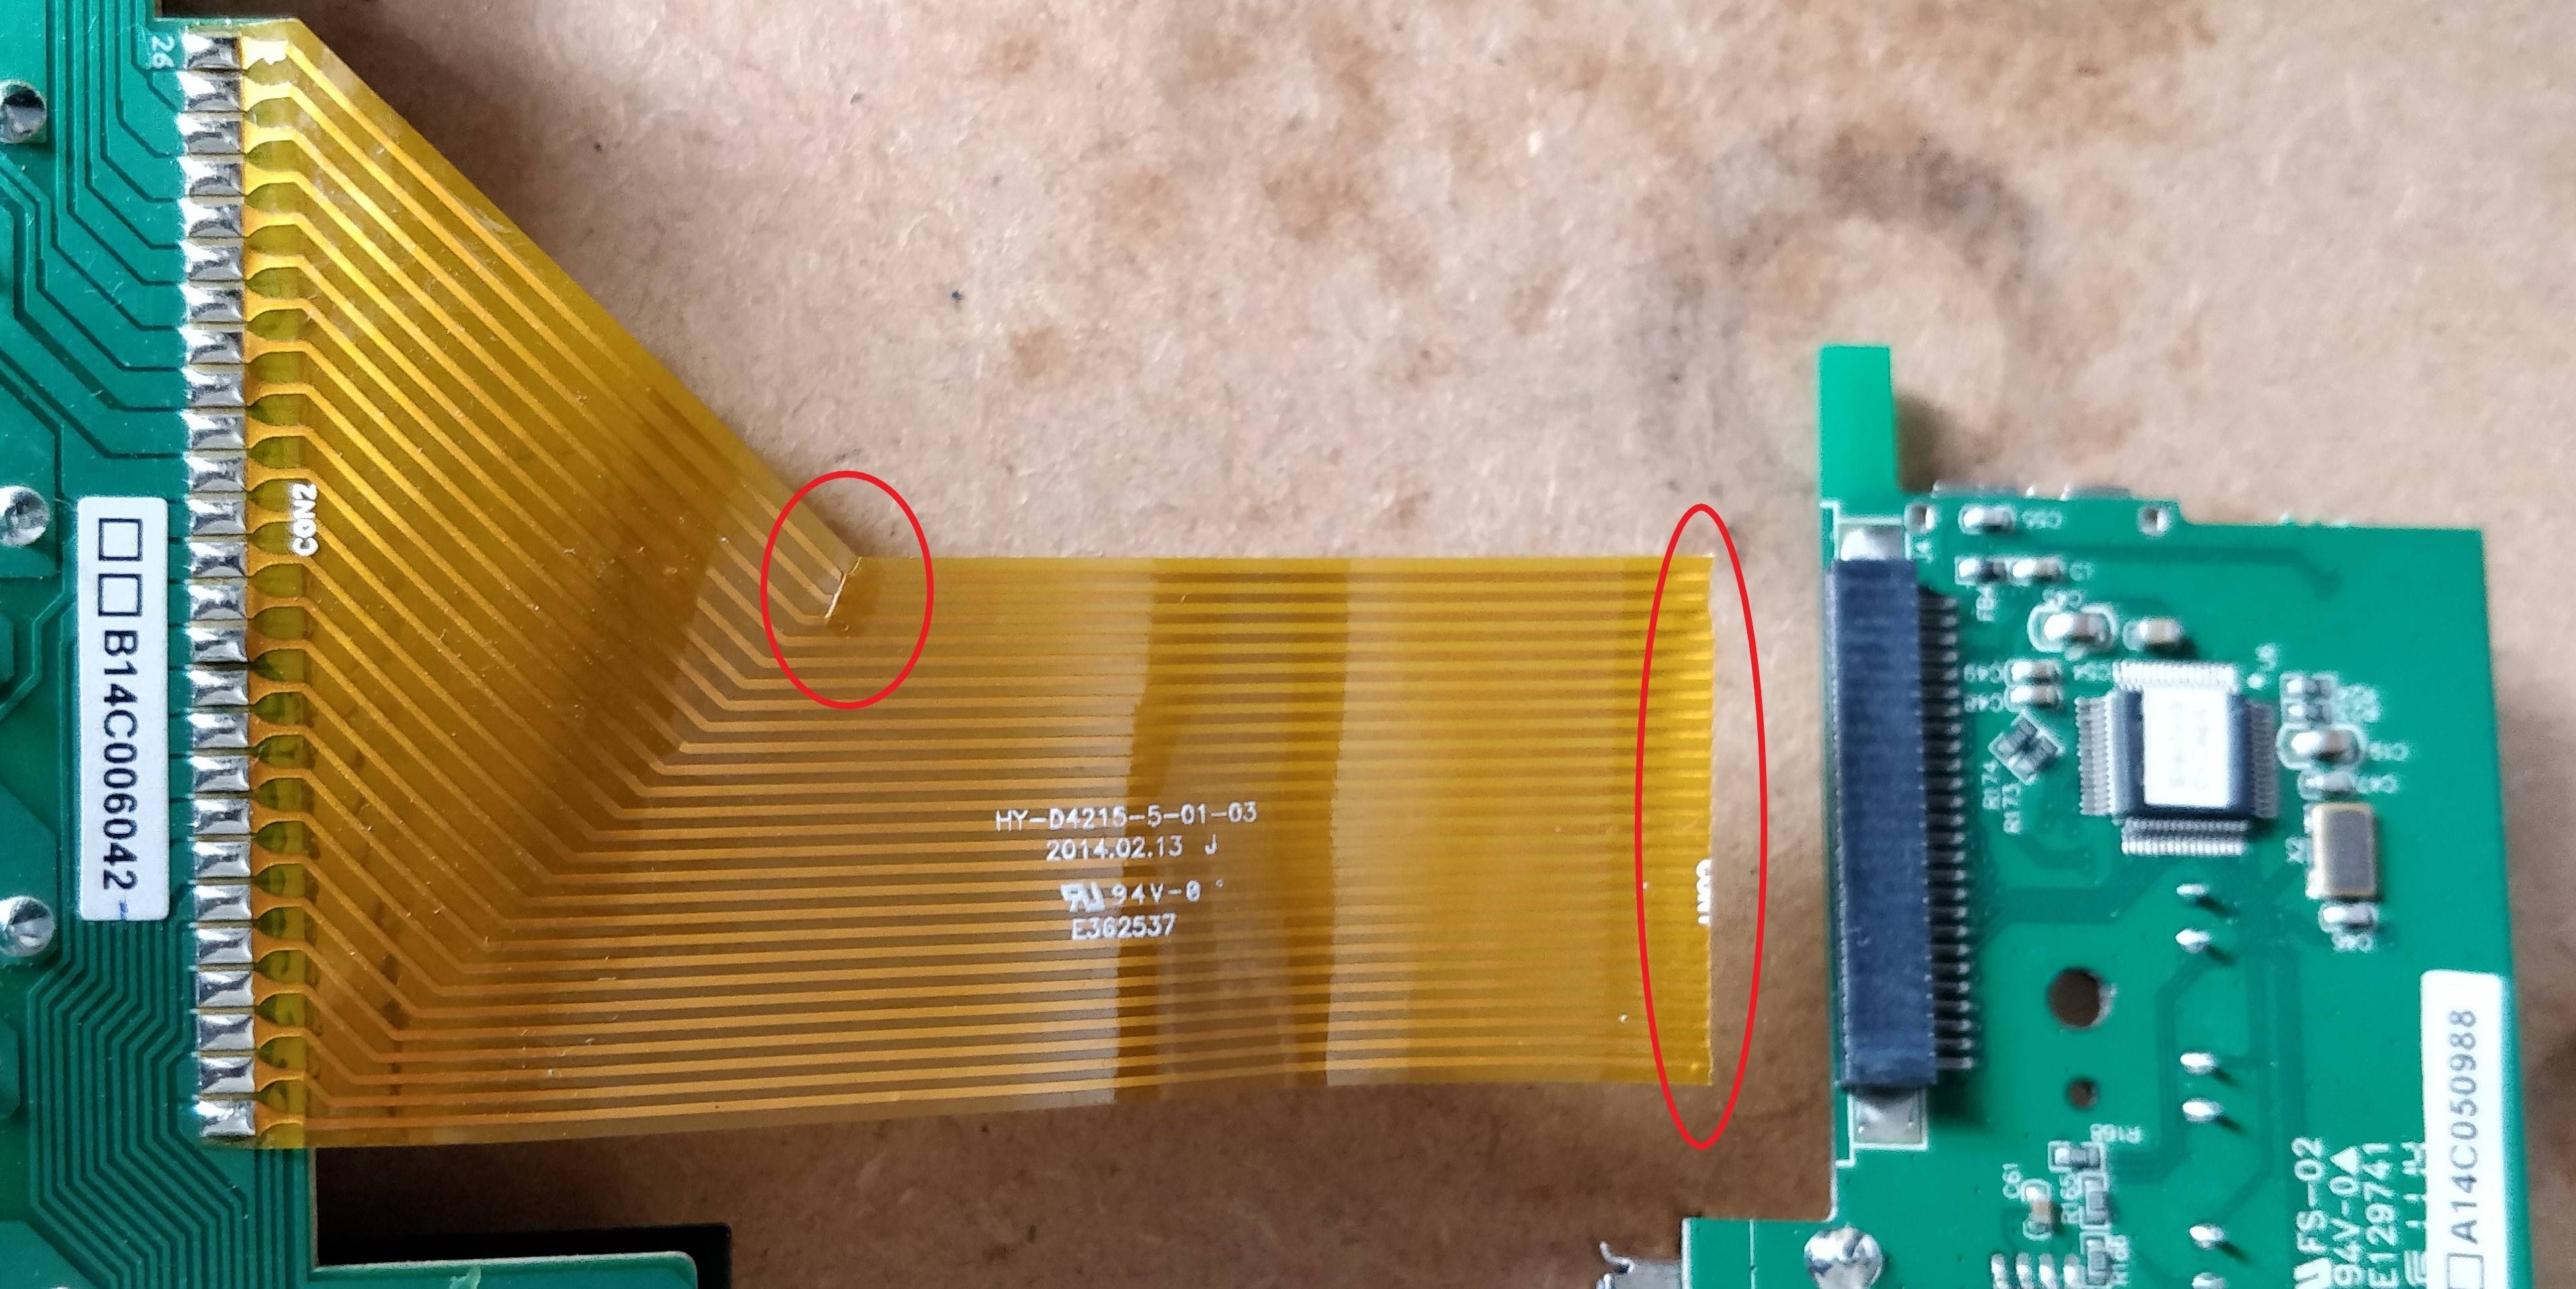 How To Fix A Ribbon Cable Connector | CellularNews